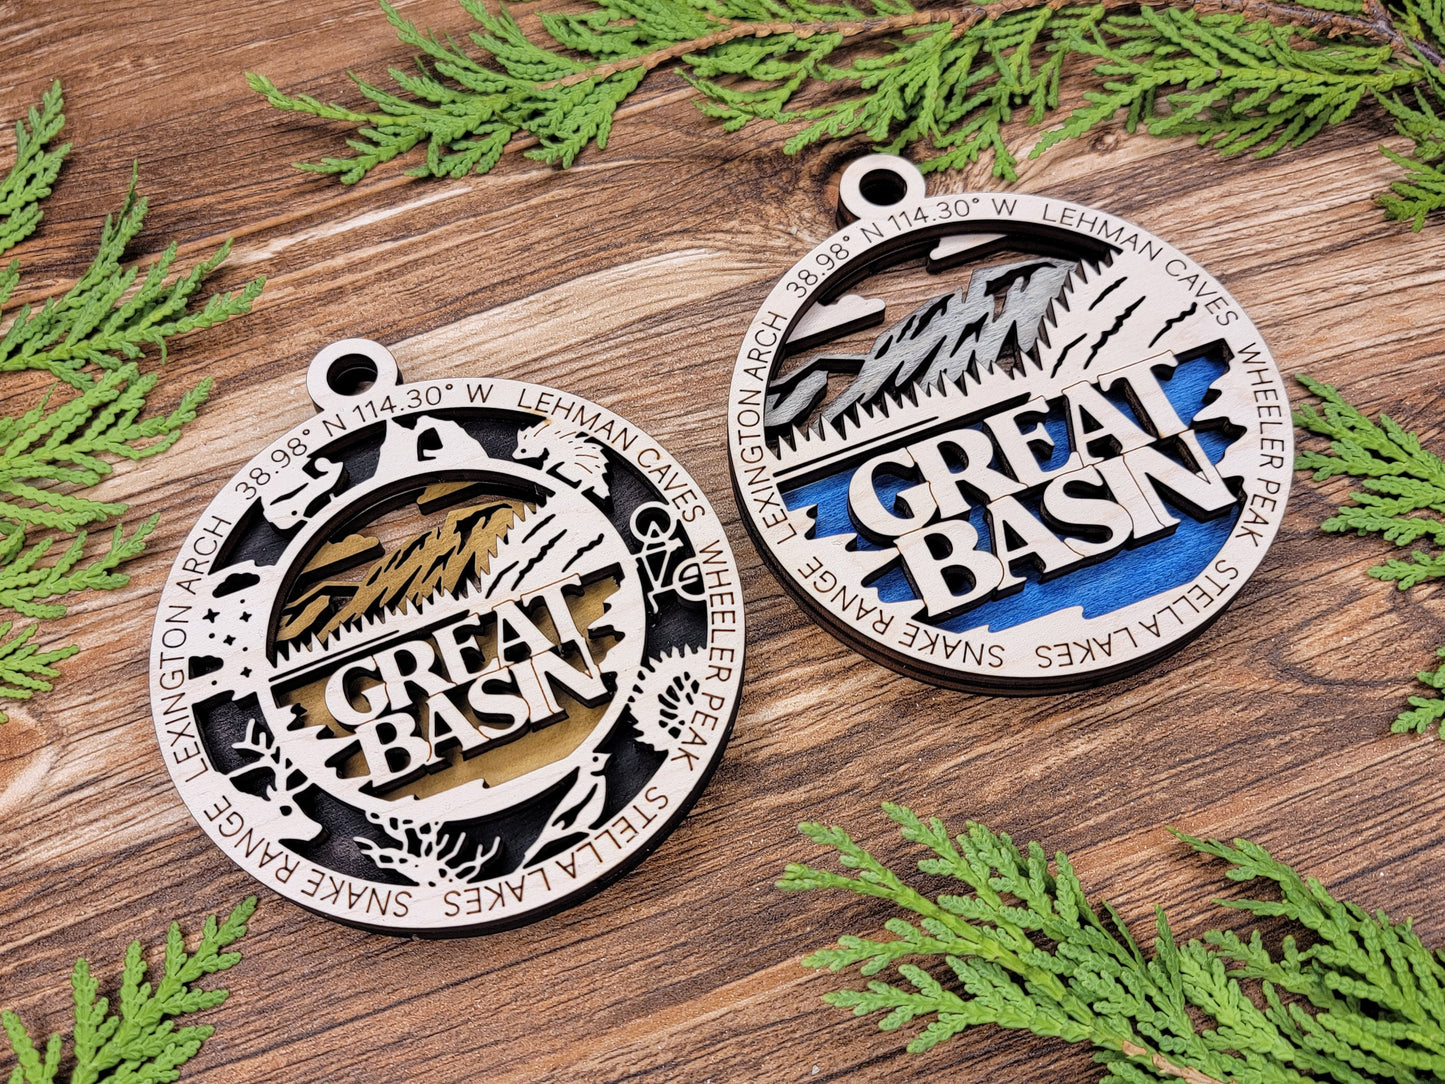 Great Basin Park Ornament - Includes 2 Ornaments - Laser Design SVG, PDF, AI File Download - Tested On Glowforge and LightBurn